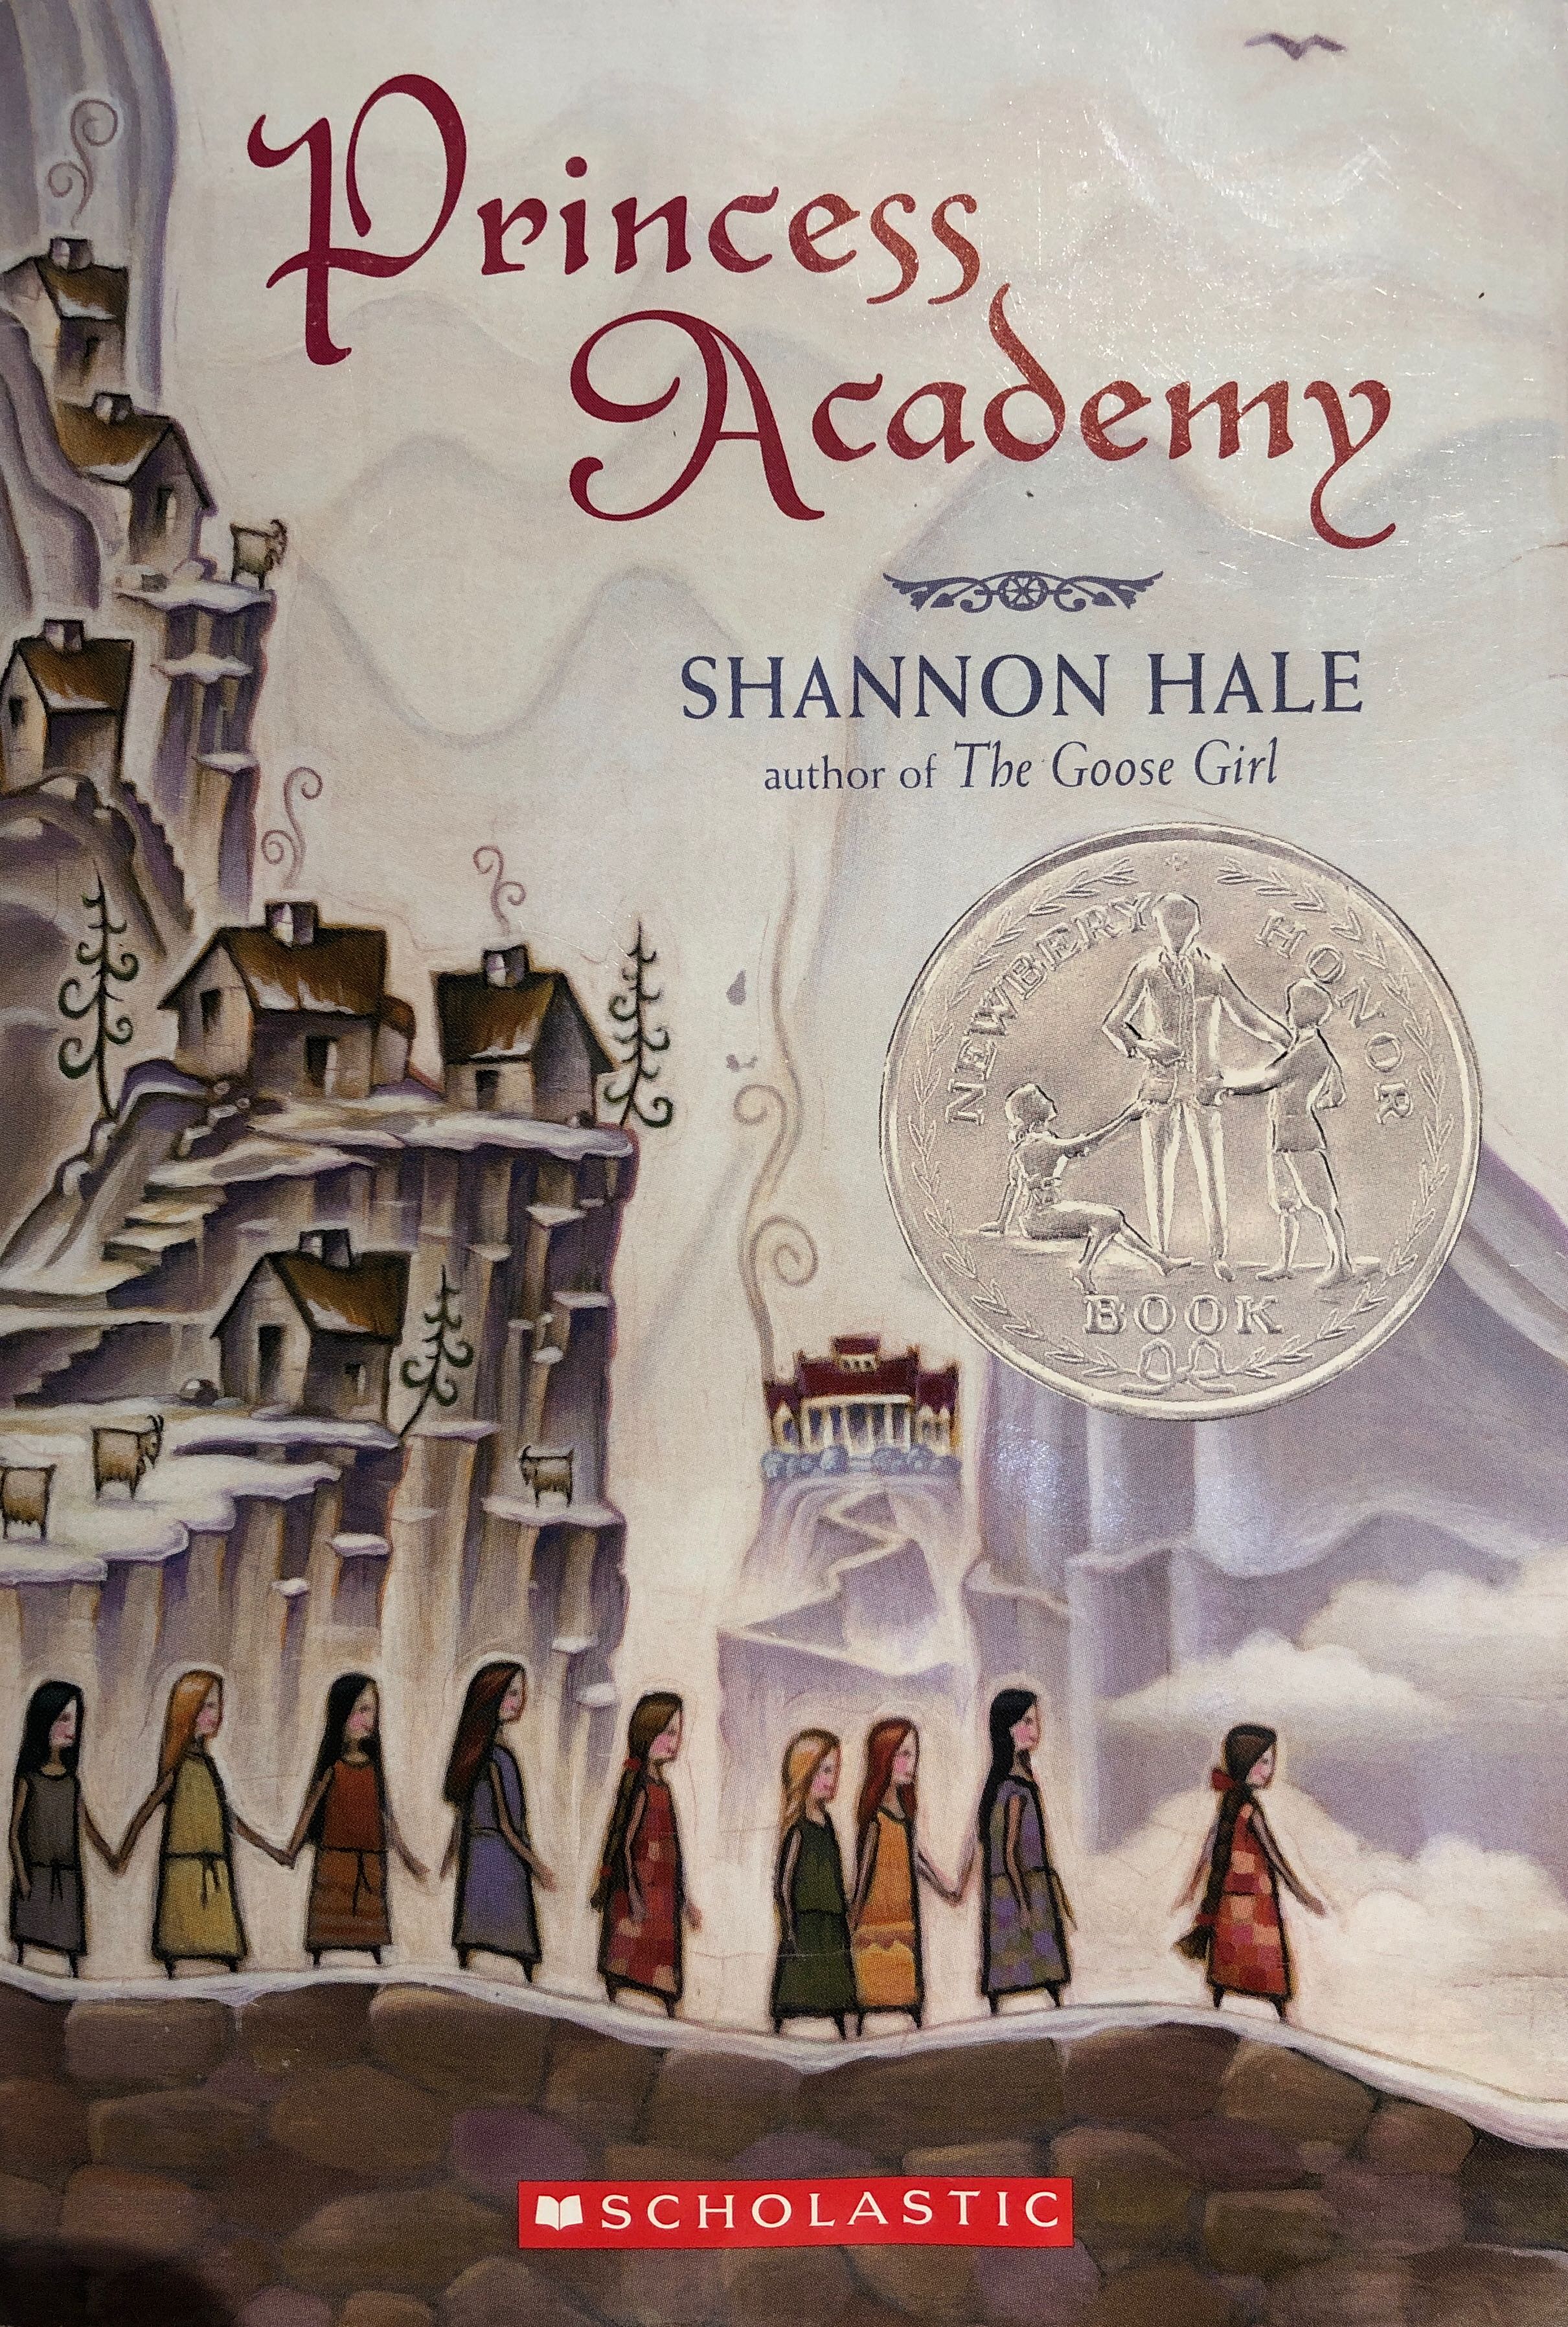 Princess Academy - Shannon Hale (Audible Audiobook - Audiobook) book collectible [Barcode 9780439888110] - Main Image 2